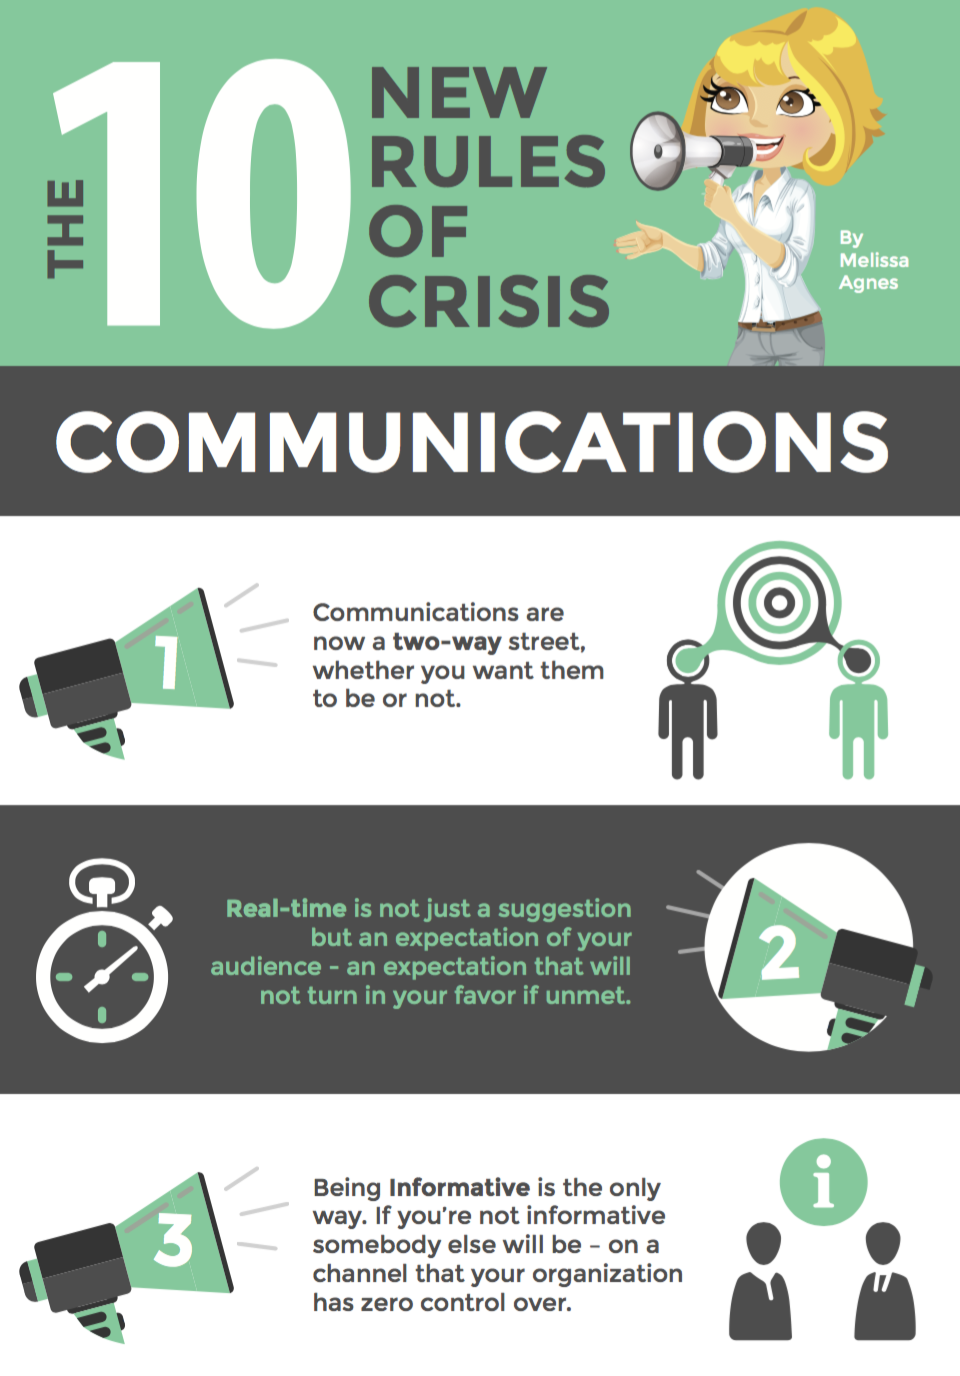 The 10 New Rules of Crisis Communications (Infographic 